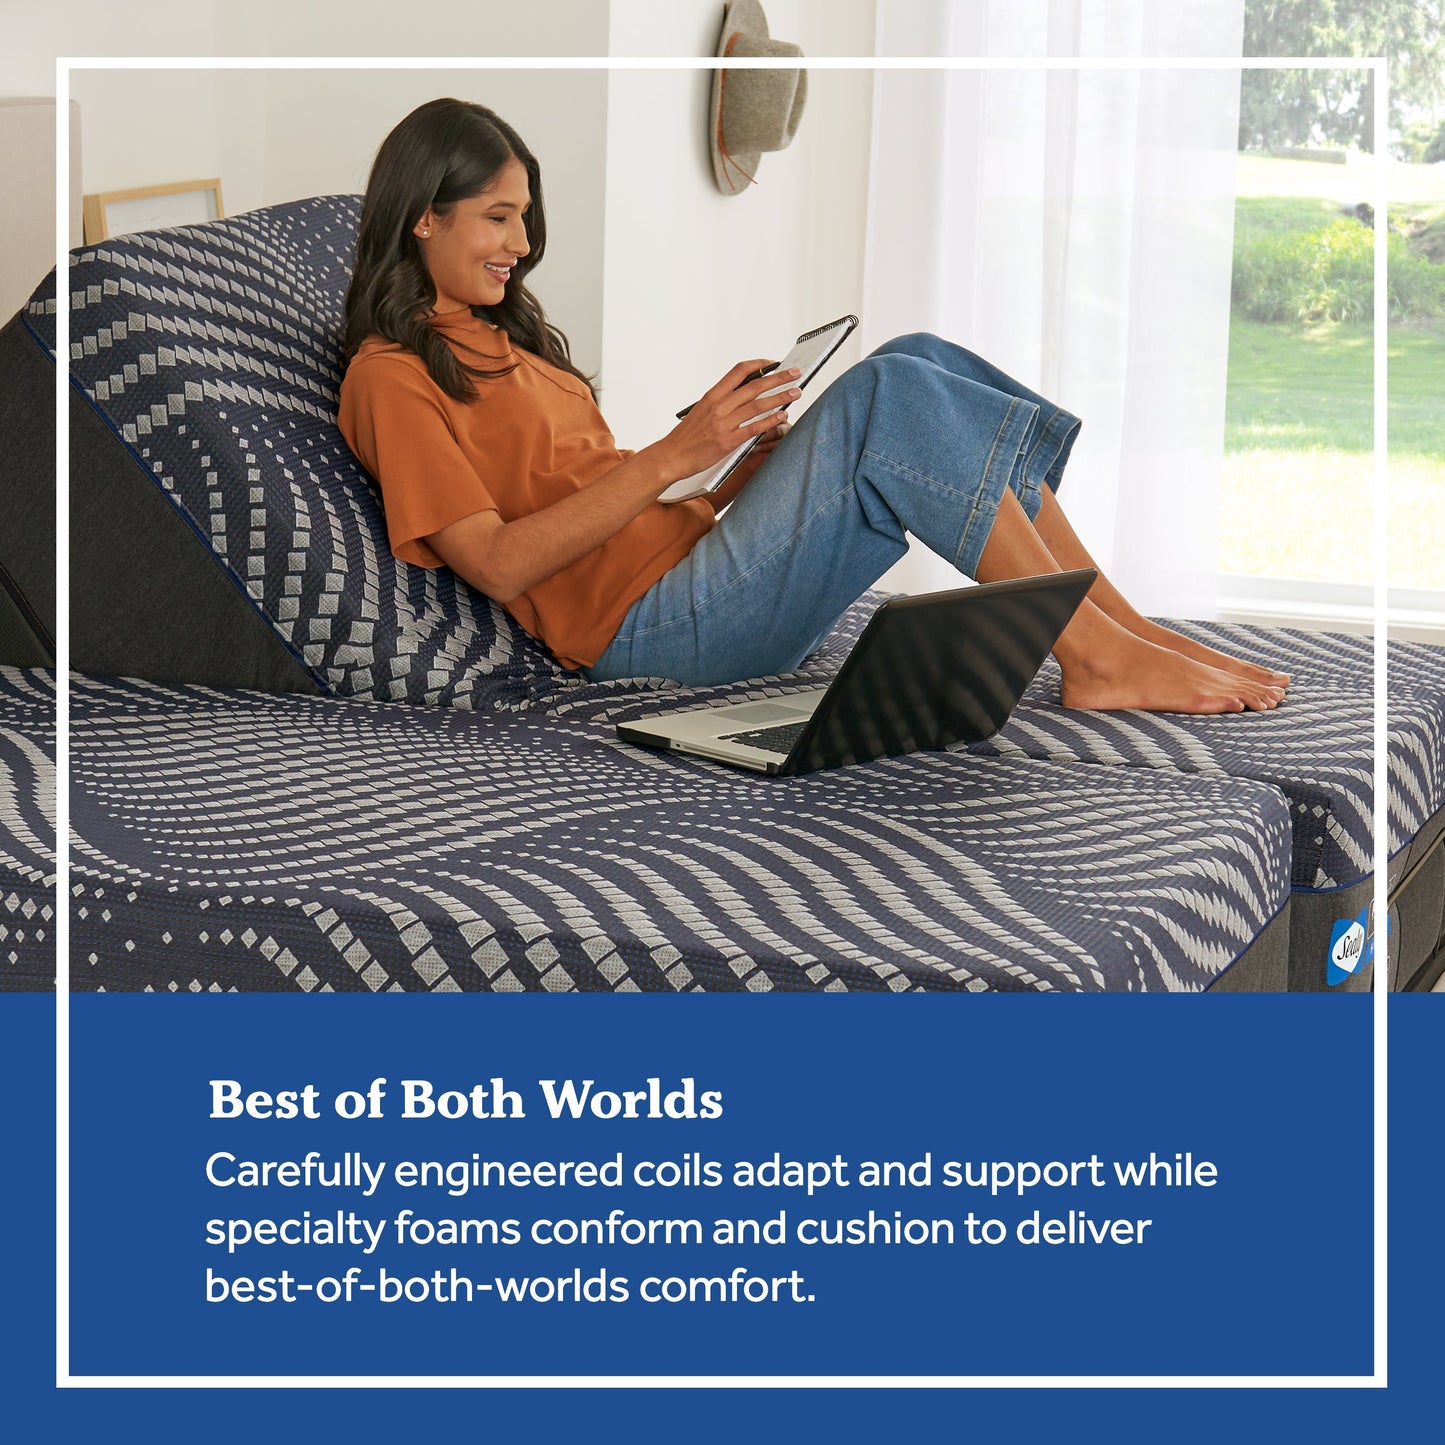 Woman Relaxing On Sealy Brenham Firm Mattress On an Adjustable Base